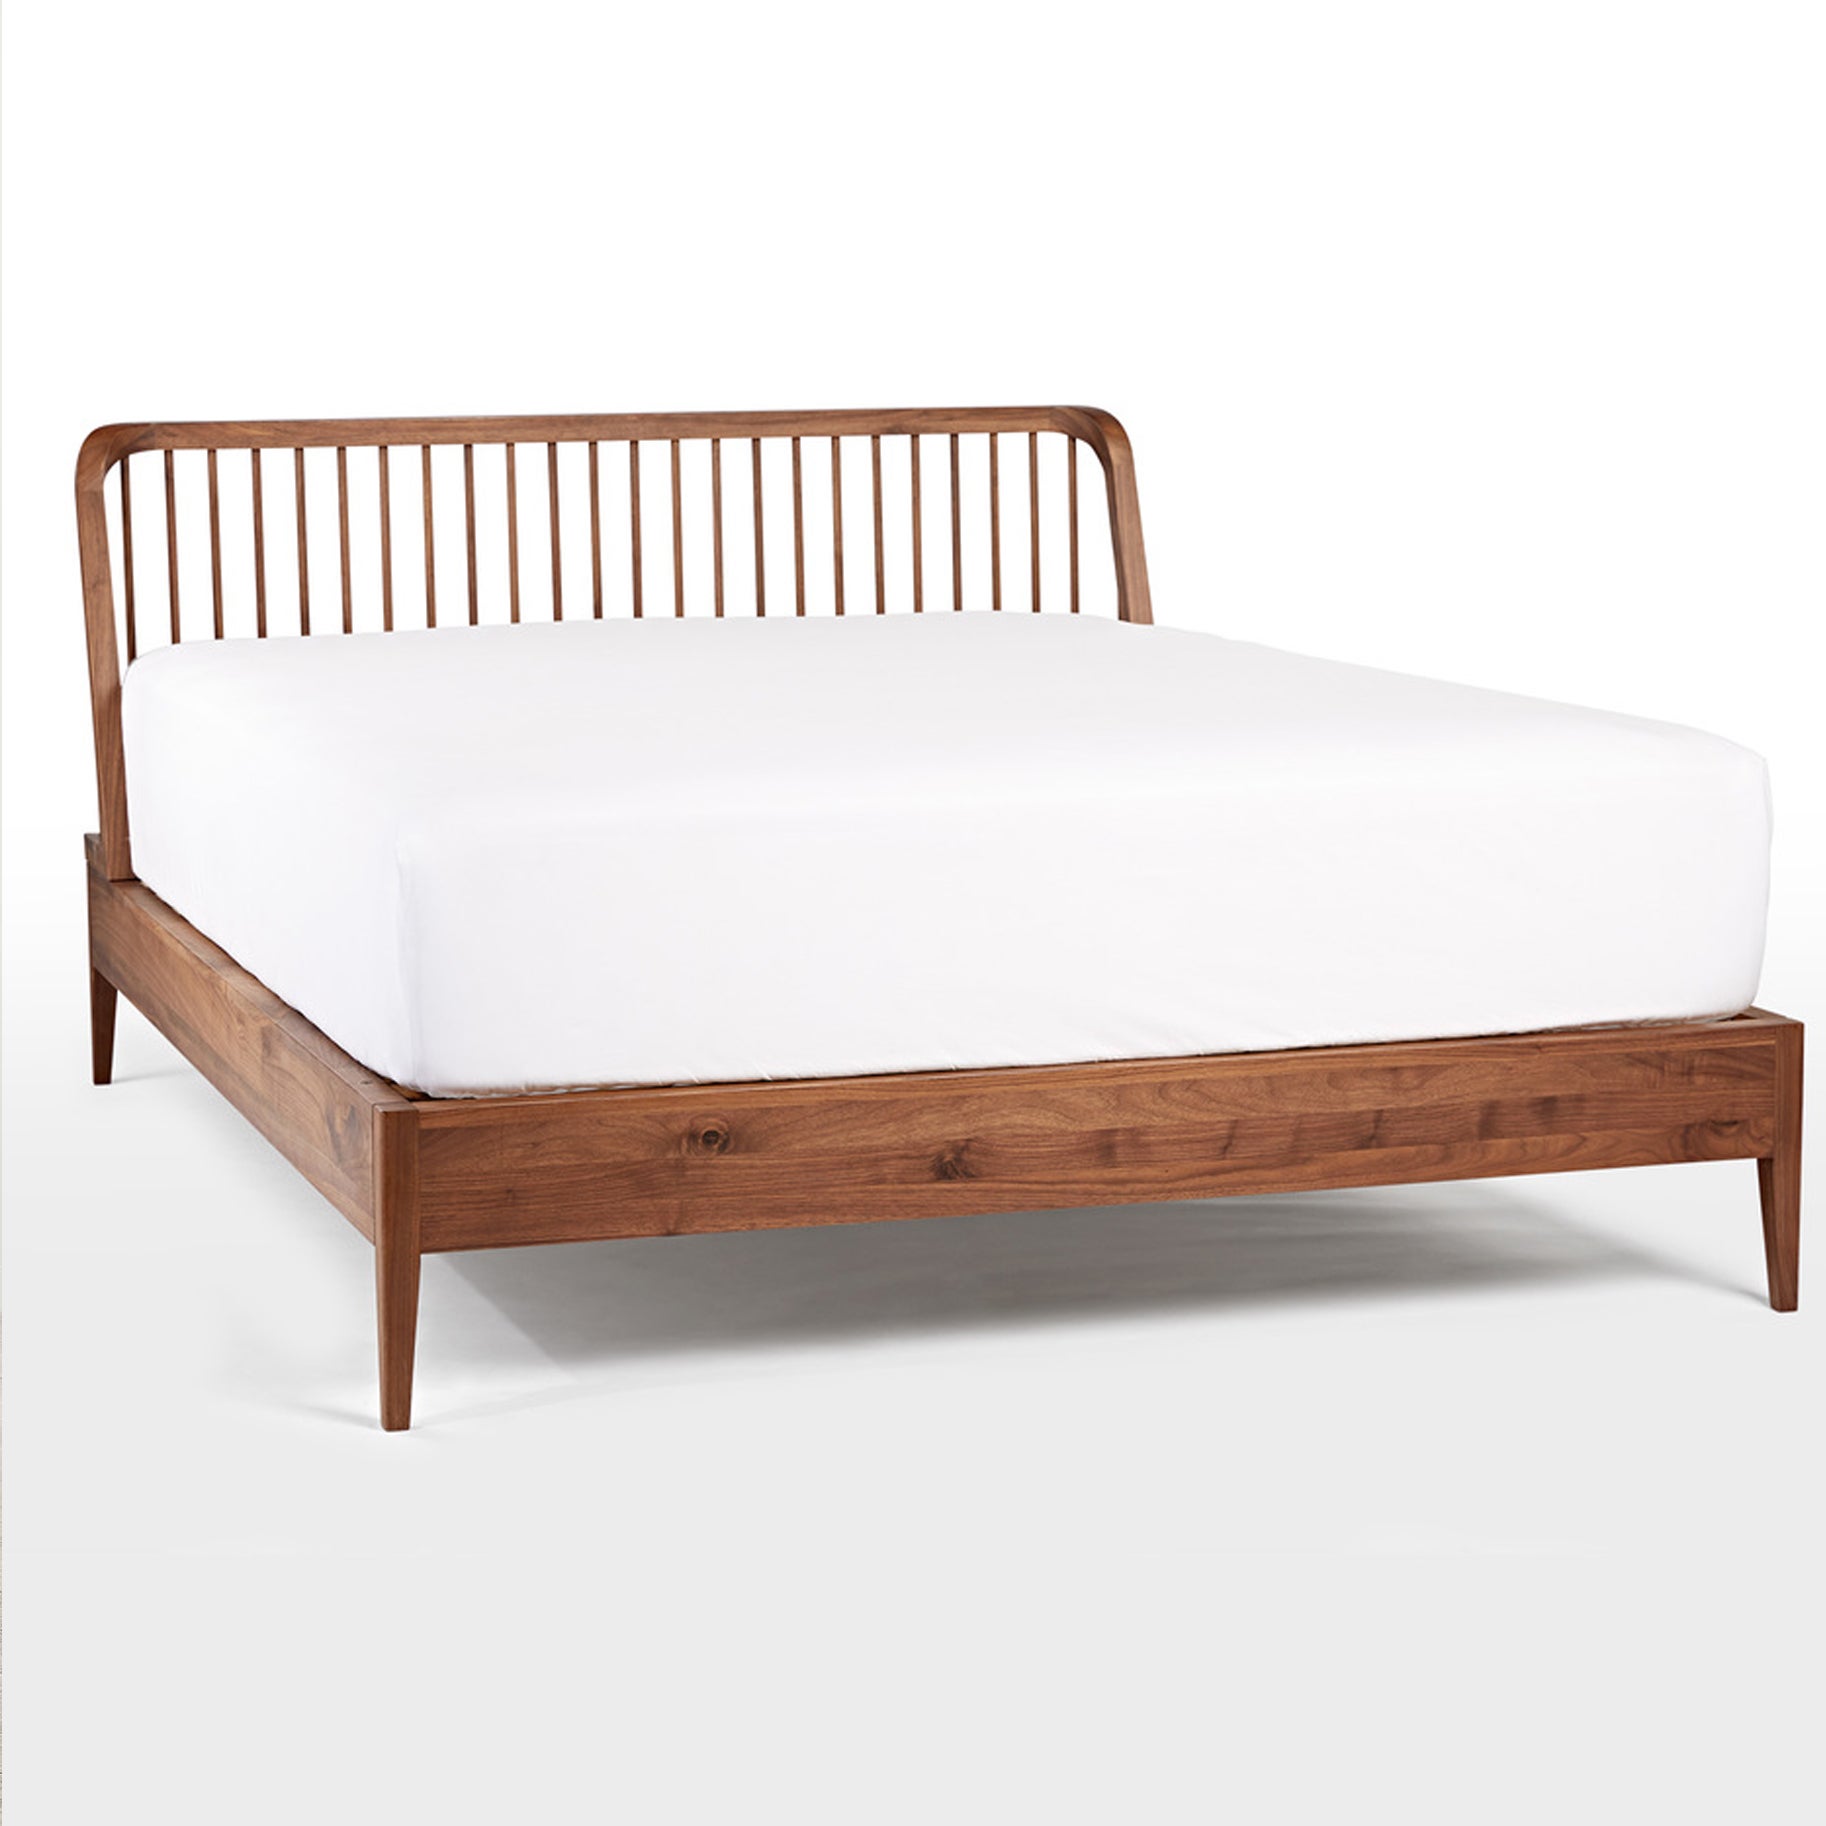 Perkins Spindle Bed Domino